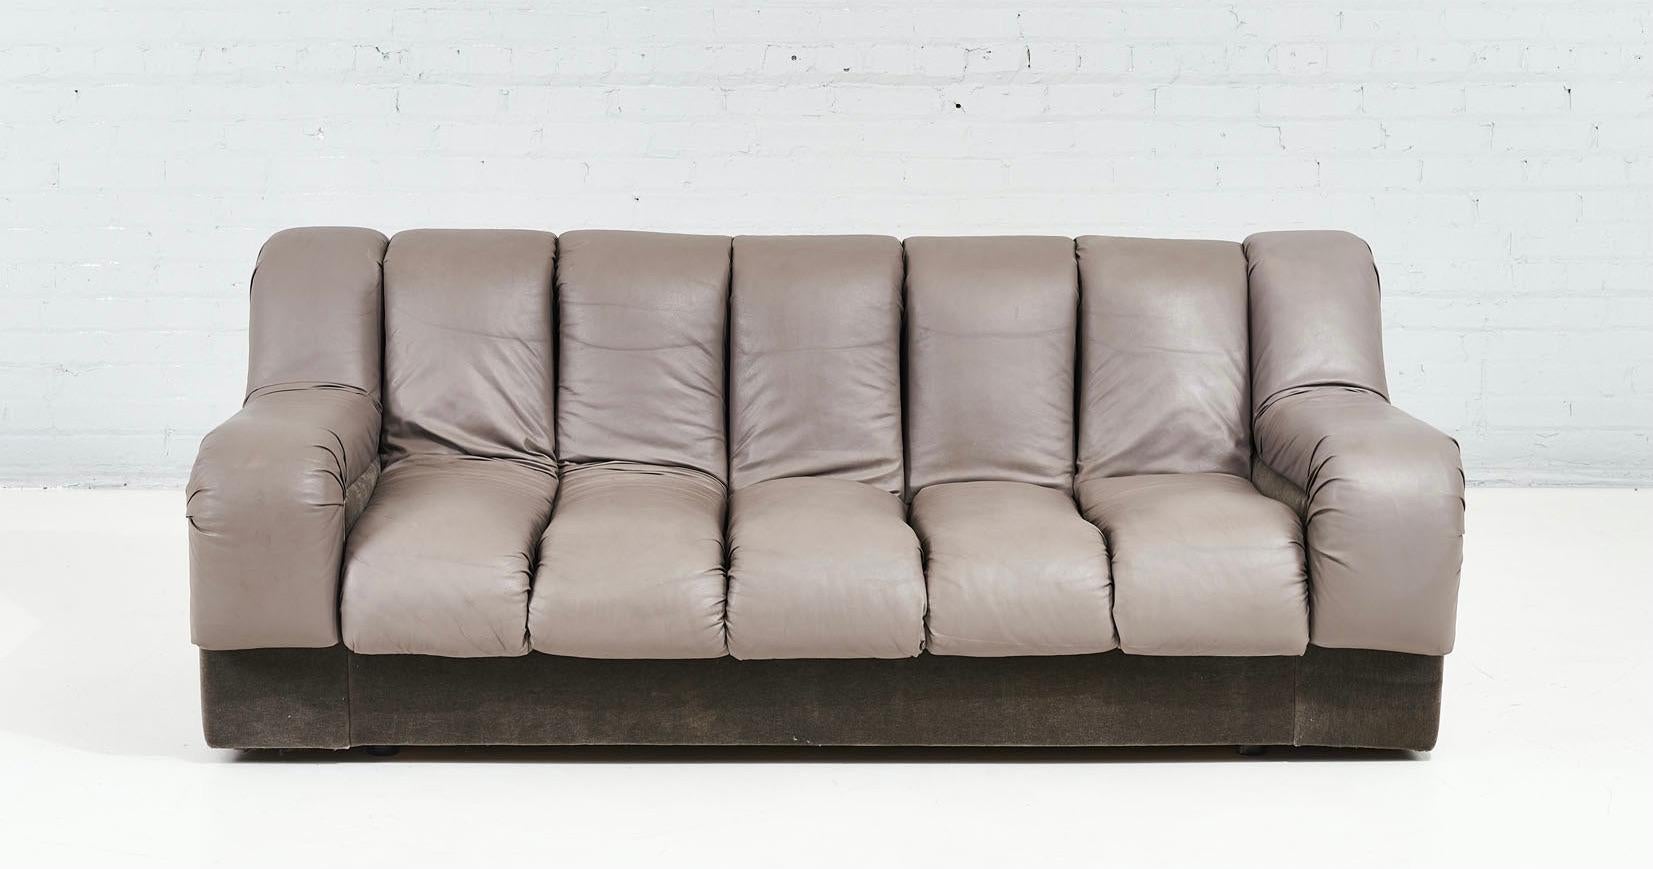 Steve Chase Style Non Stop Channeled Tufted Sofa, 1970. Gepolstertes Sofa aus Mohair und Naugahyde

